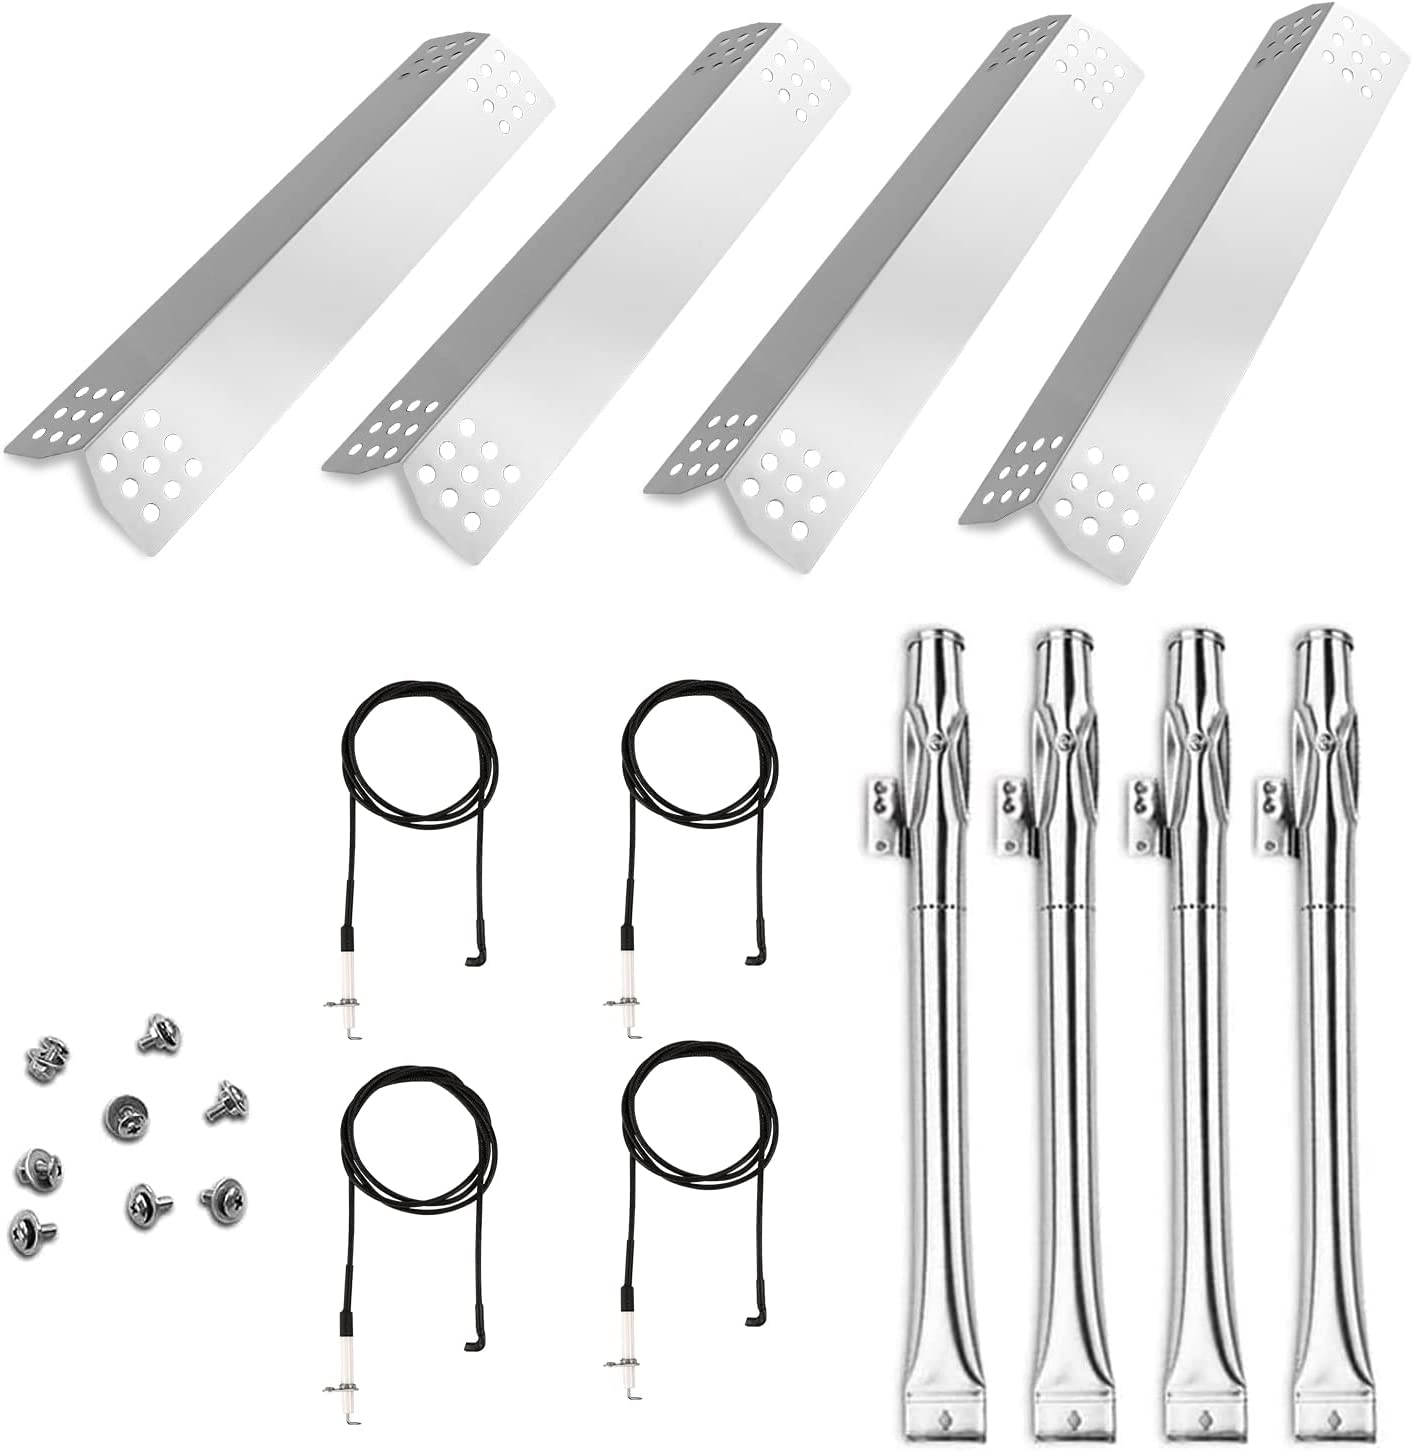 Grisun Replacement Parts Kit for Home Depot Nexgrill 720-0830H, 720-0830D, 720-0783E, Kenmore 122.33492410 Members Mark720-0830F BHG720-0783H Cuisinart CGG-7400 Grill Burner Cover Heat Plate Igniter - image 1 of 8